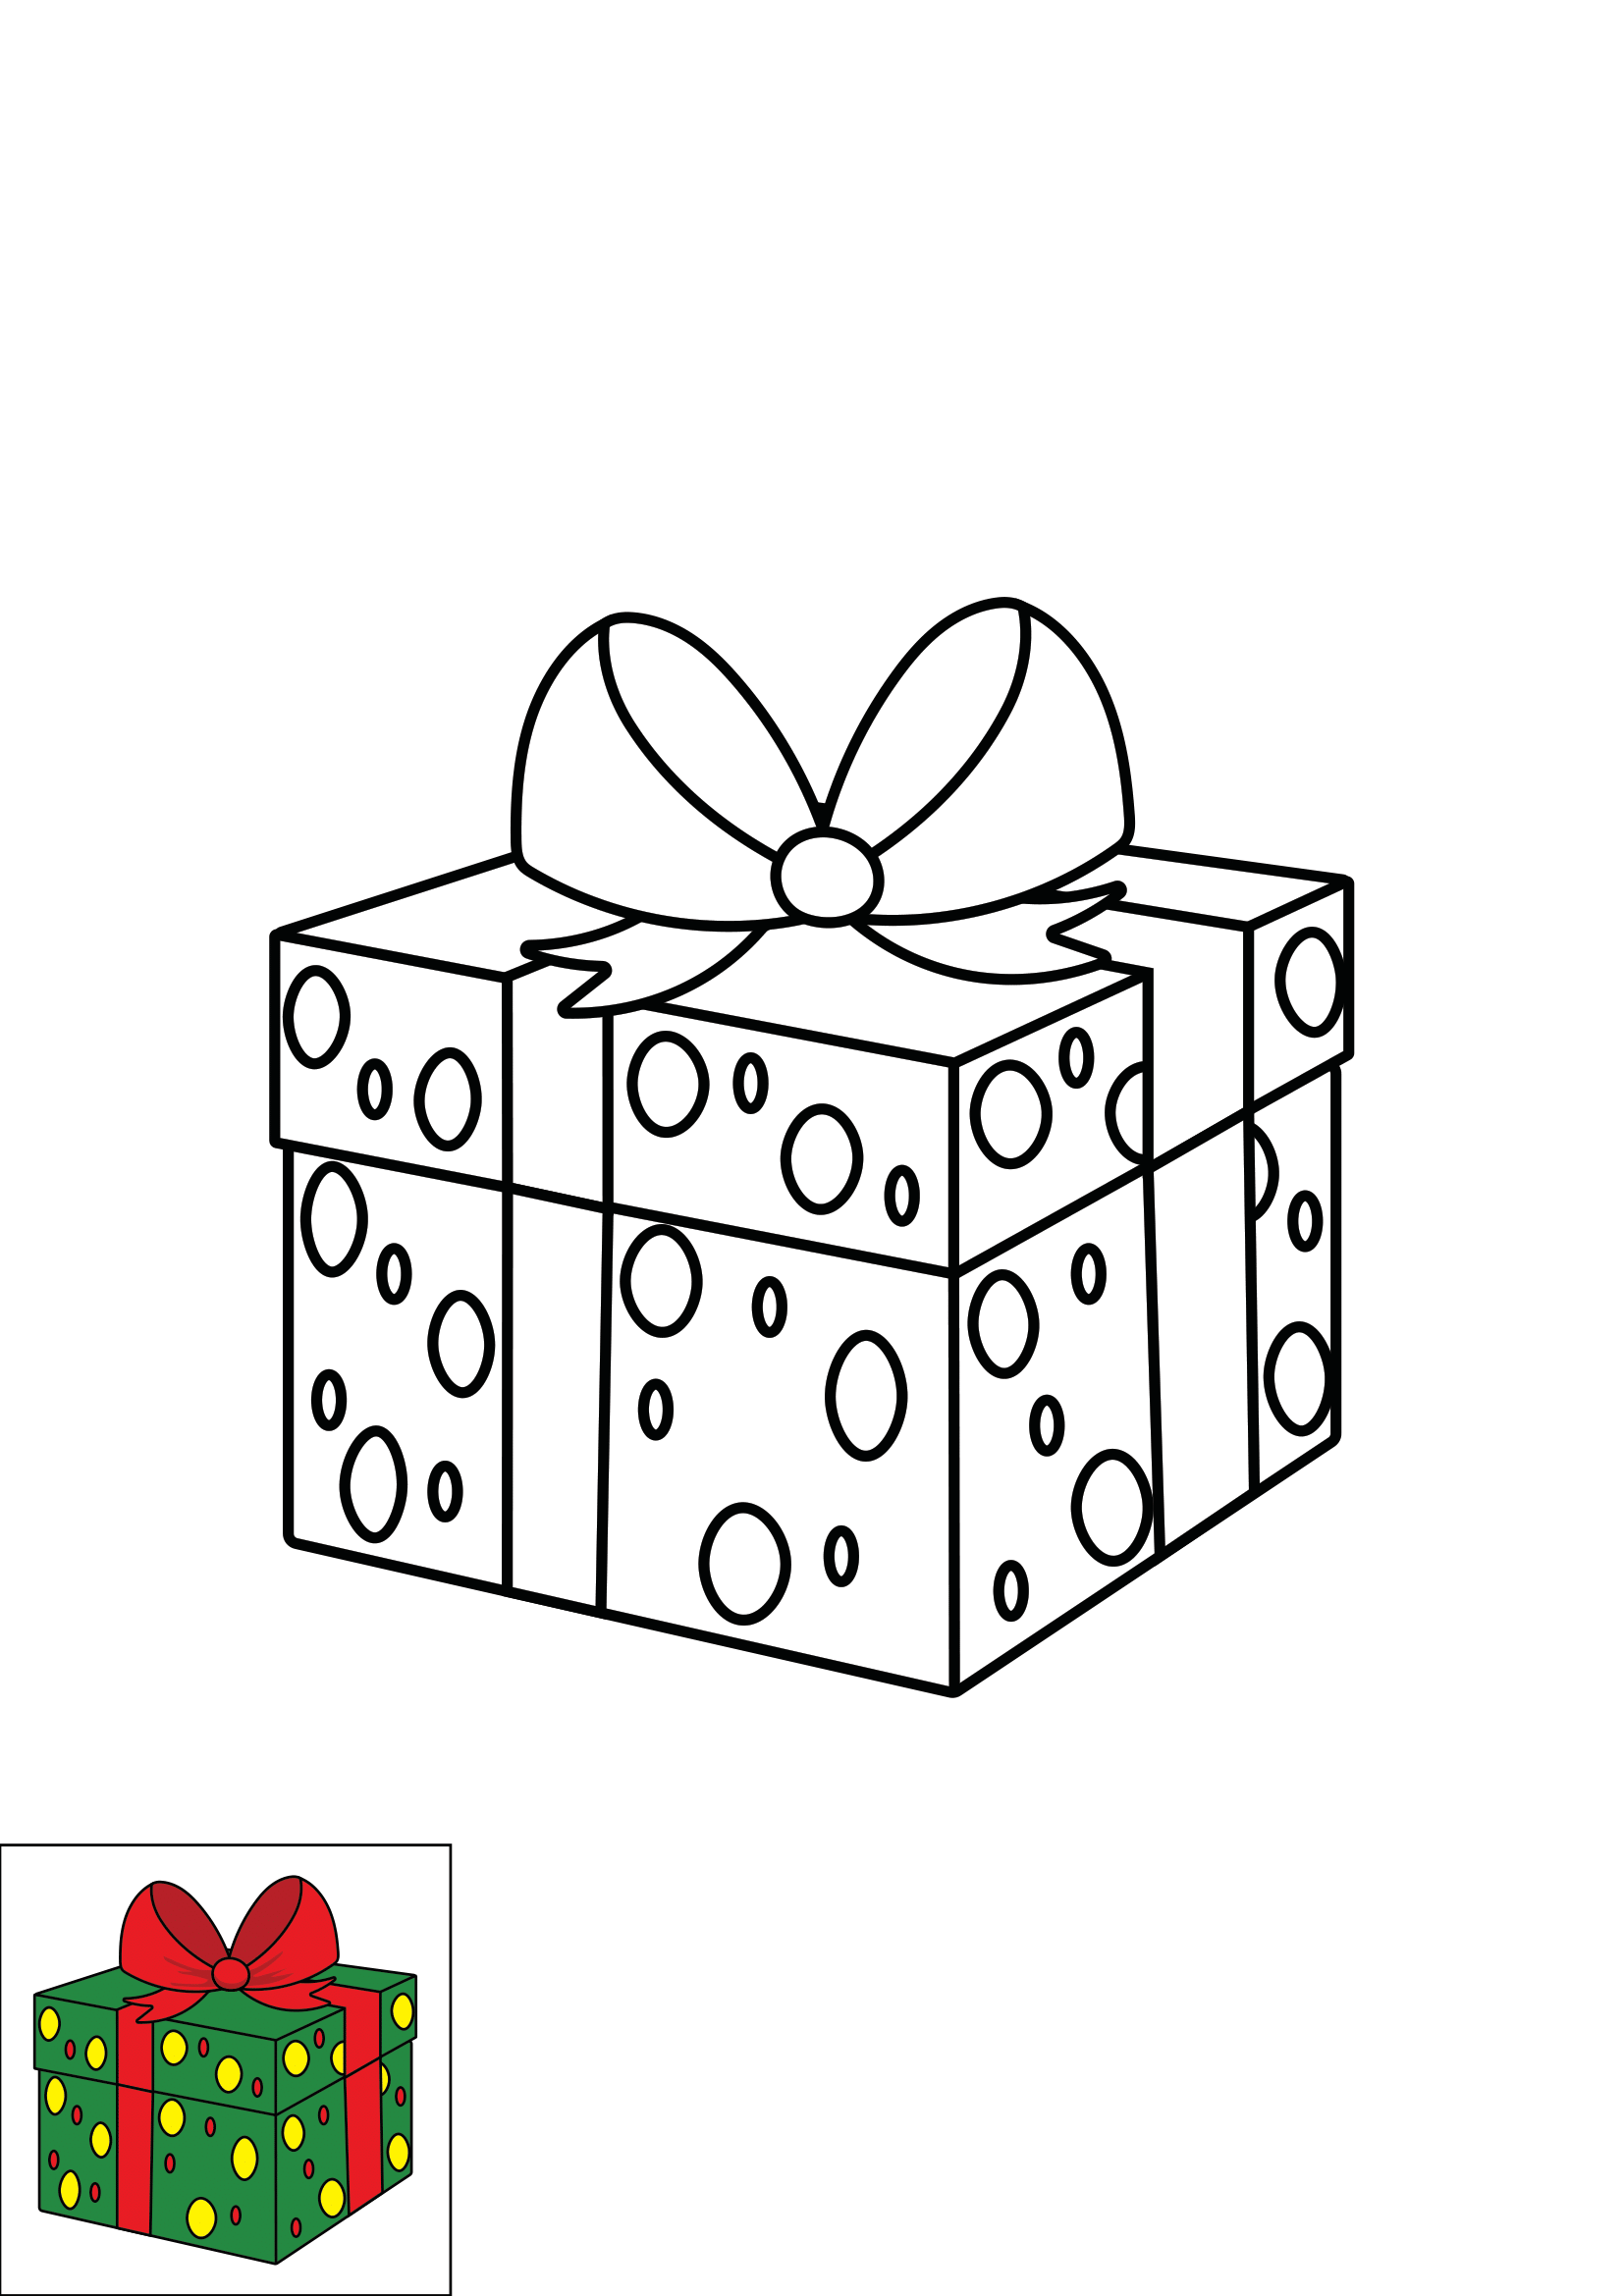 How to Draw A Christmas Present Step by Step Printable Color